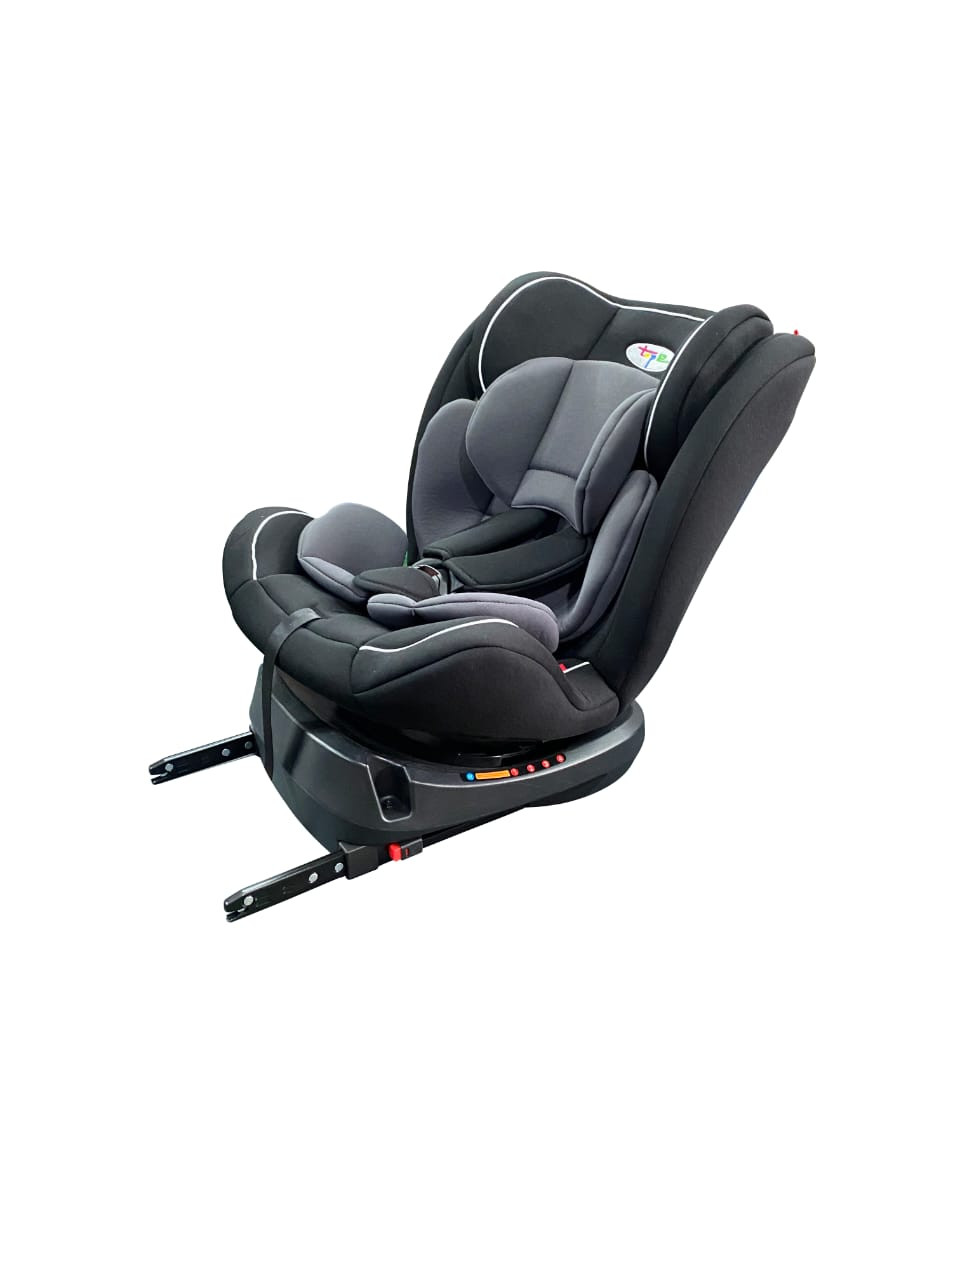 TOP 2 ISOFIX BABY CAR SEAT - 360 DEGREES ROTATION (UP TO 12YRS)